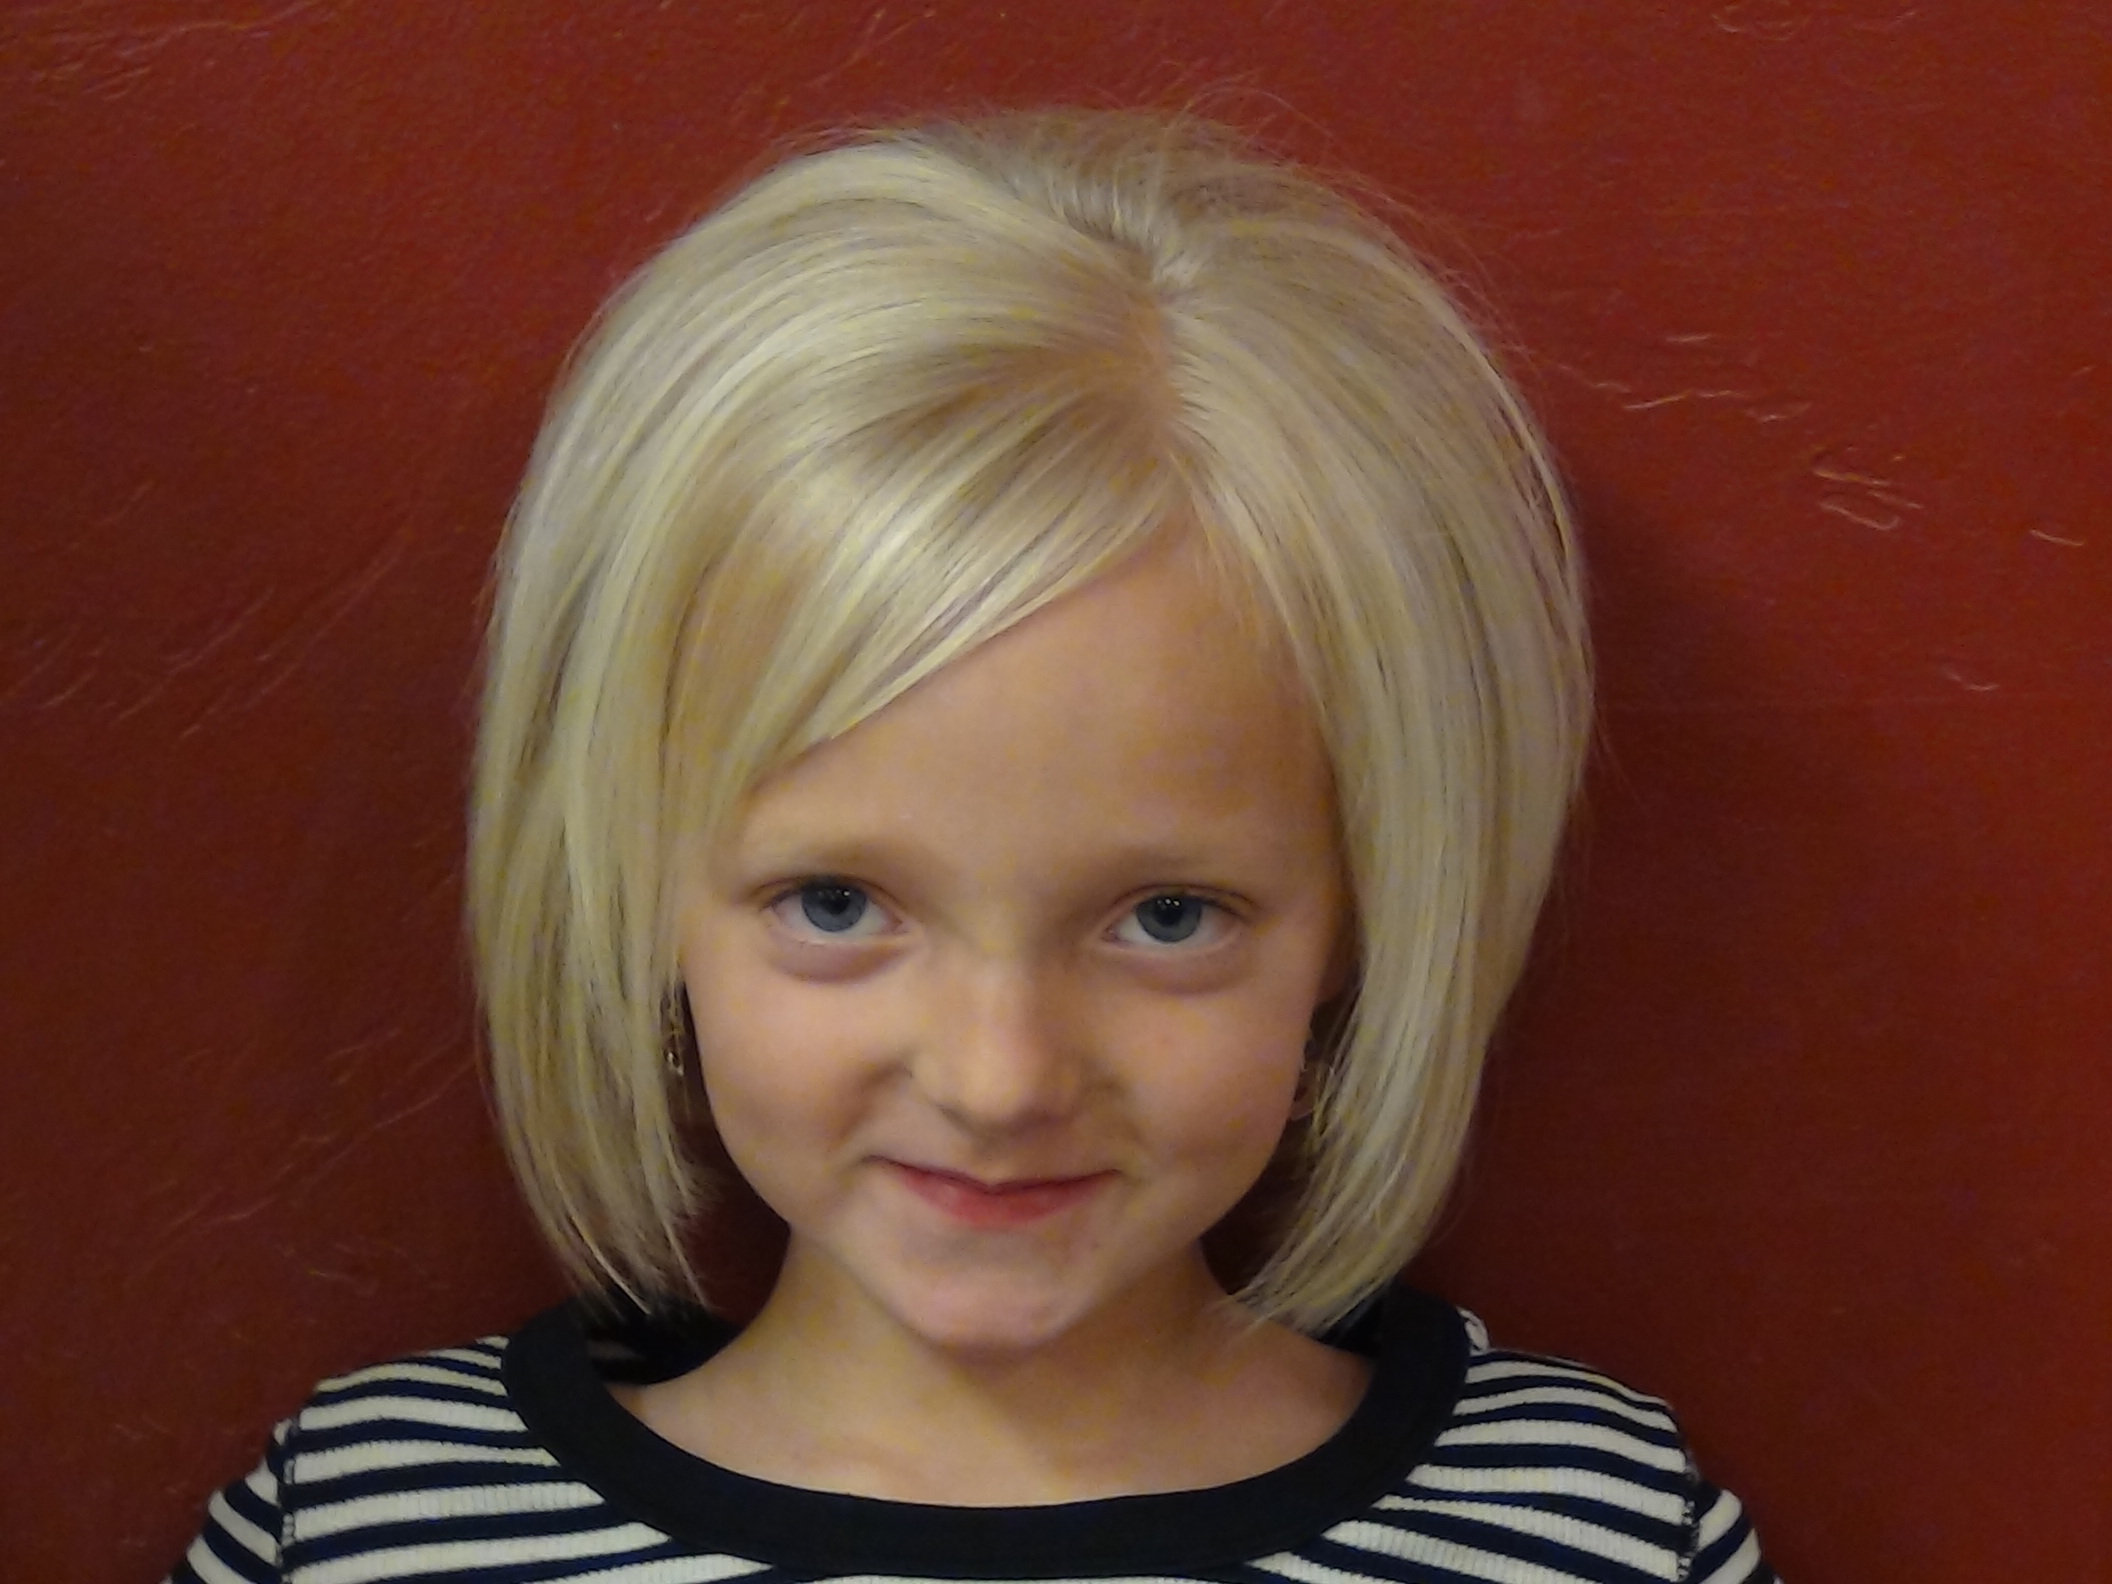 Little Girls Haircut And Style Boys And Girls Hairstyles And